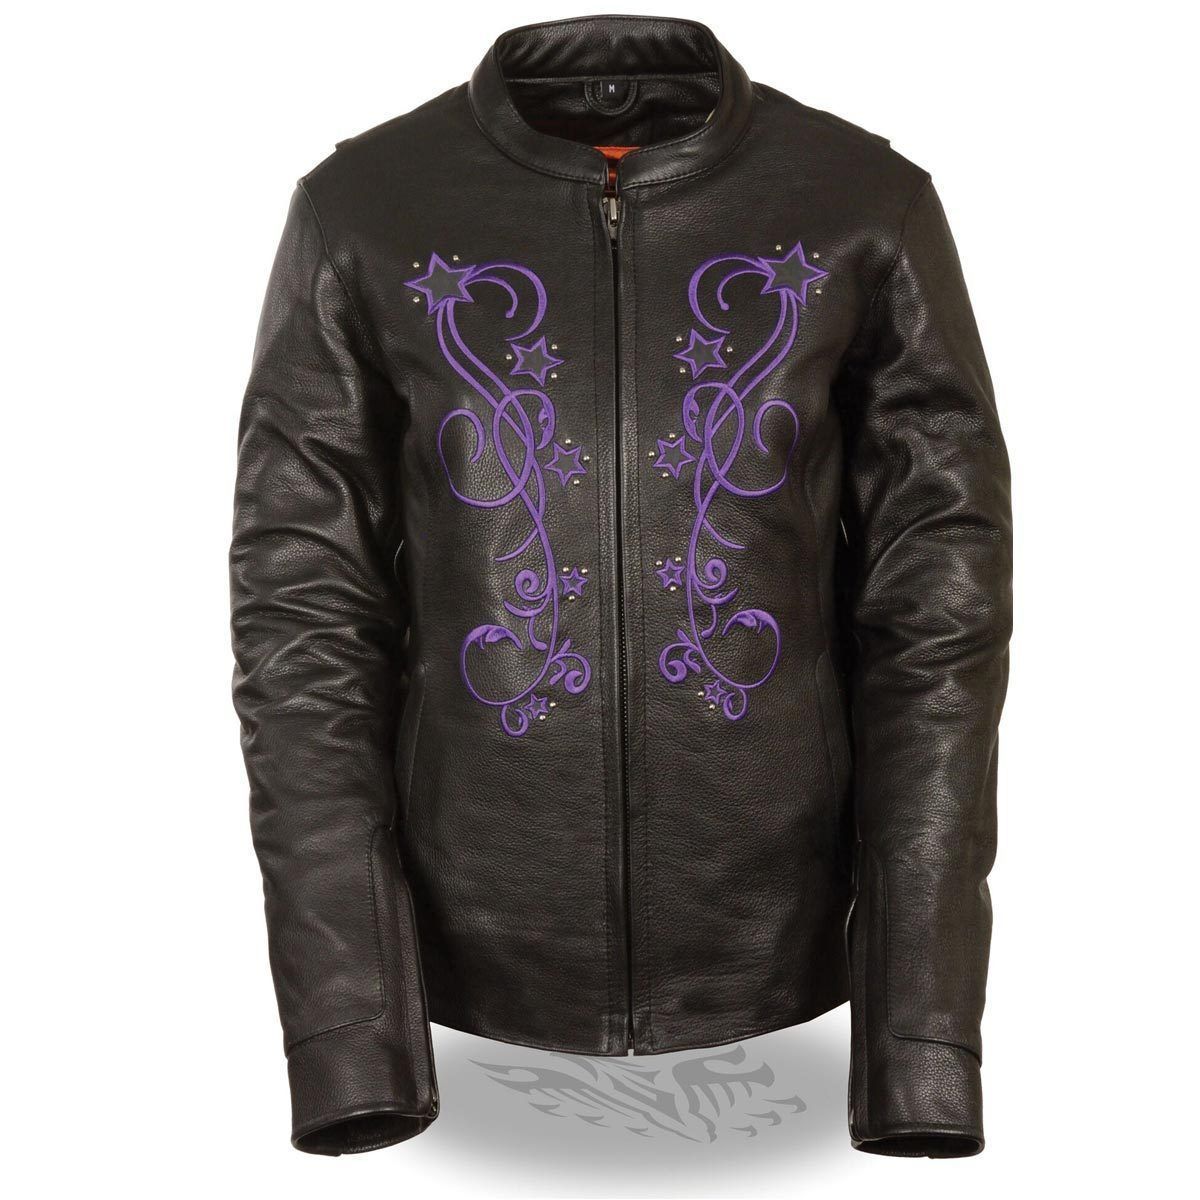 Milwaukee ML2500 Women's Reflective Star Riveted Black and Purple Leather Jacket